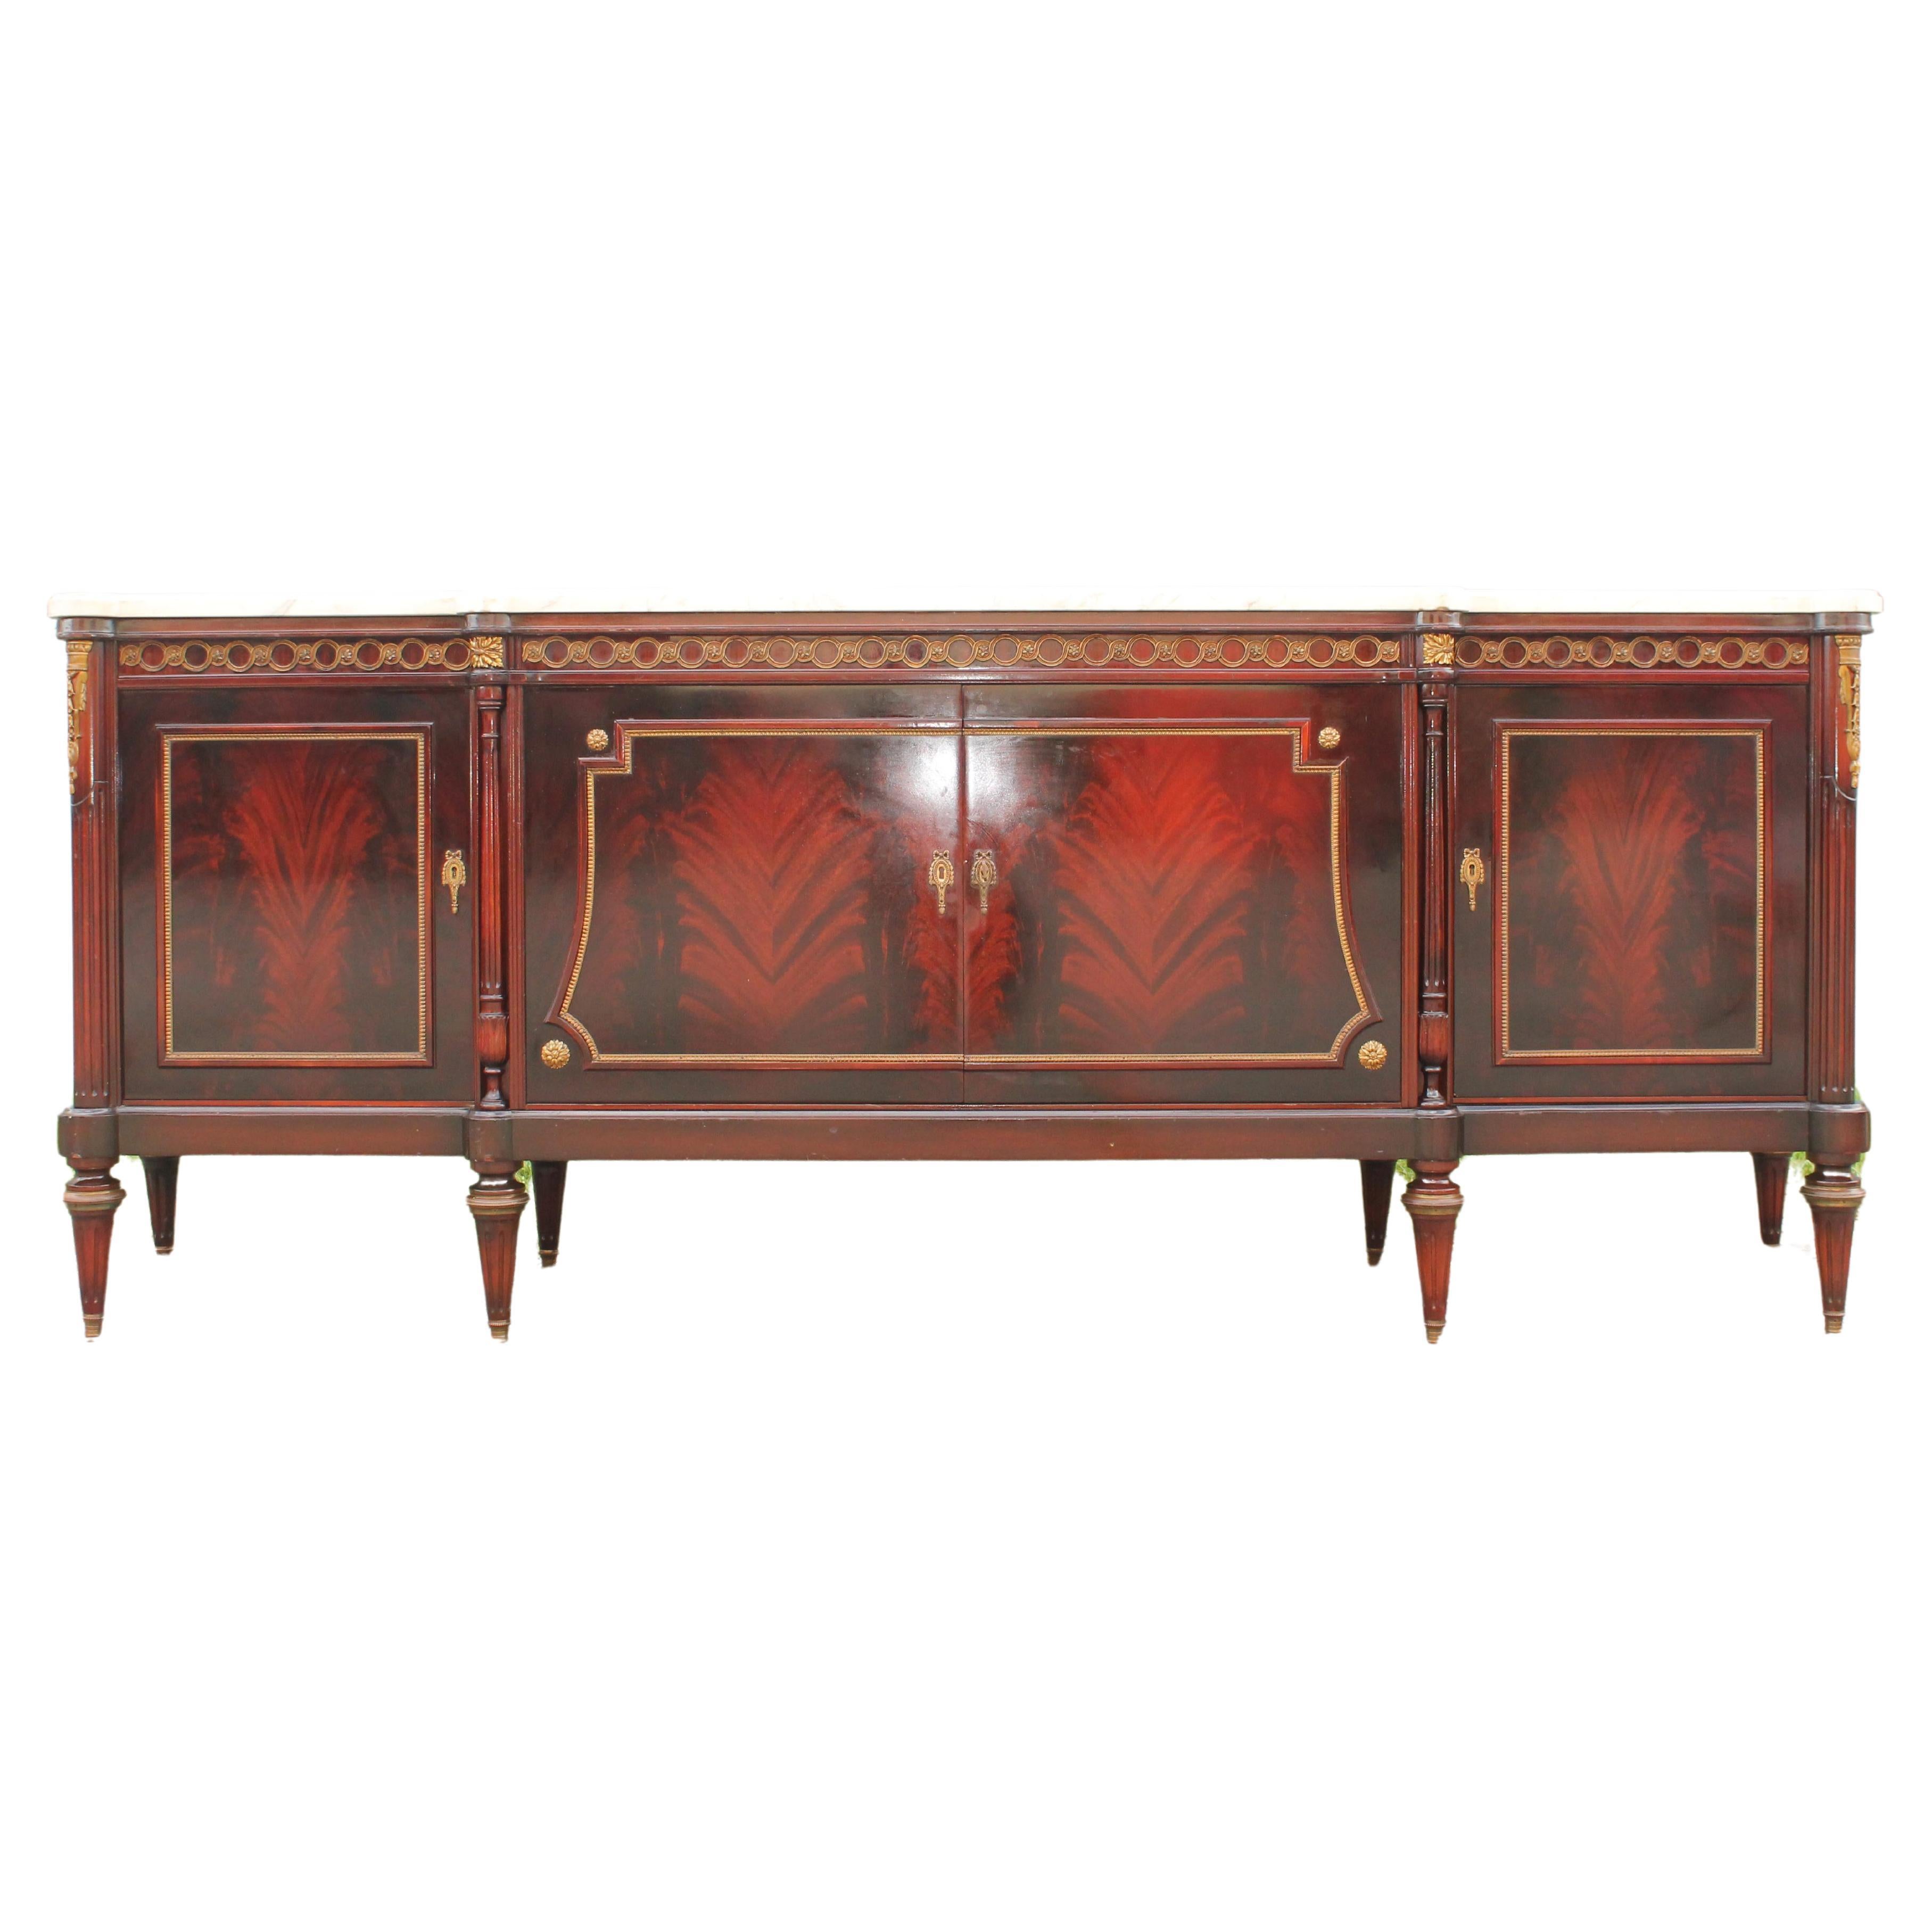 1920's Neoclassic style Marble Top Flame Mahogany Buffet/ Sideboard/ Credenza For Sale